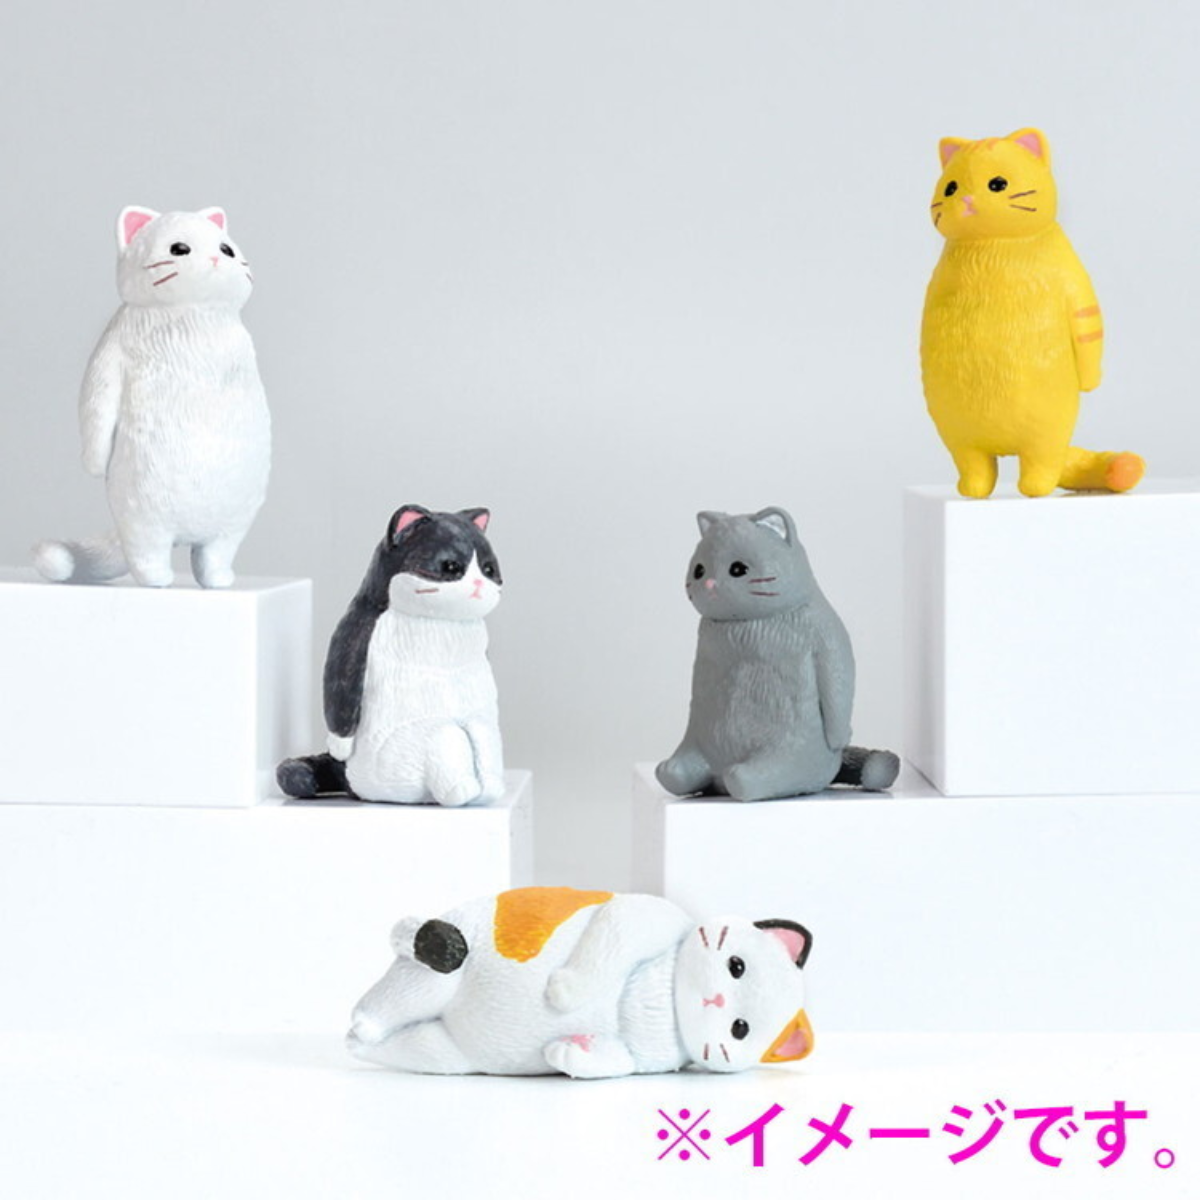 Yell x Kyomu Emptiness Cat-Display Box (Set of 10)-Yell-Ace Cards & Collectibles